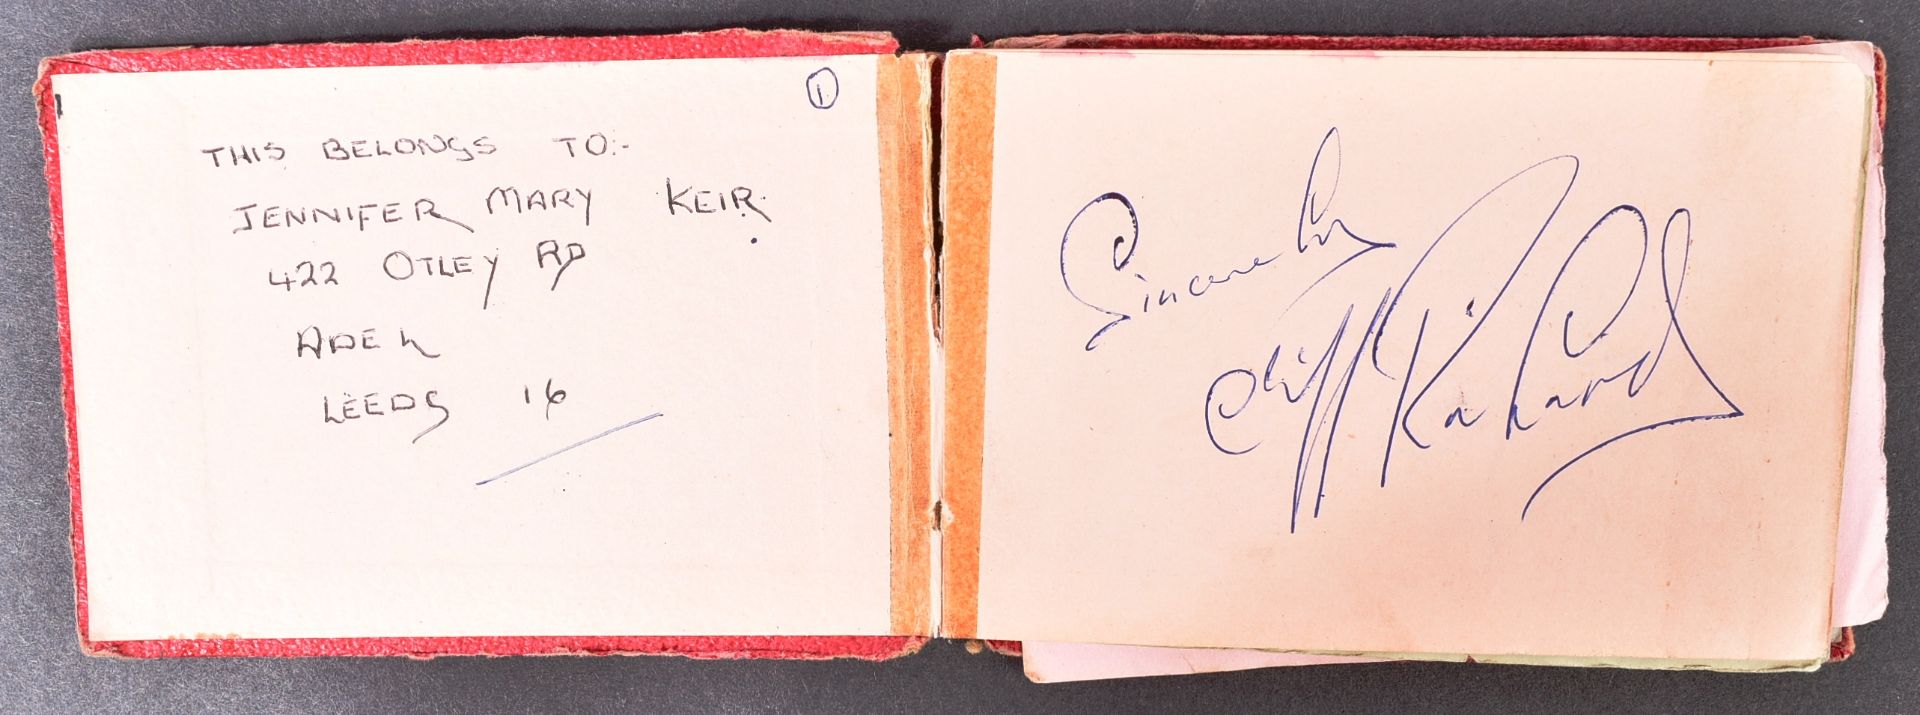 GERALD WHITNEY COLLECTION (CAMERA MAN) - AUTOGRAPH BOOK - Image 5 of 8